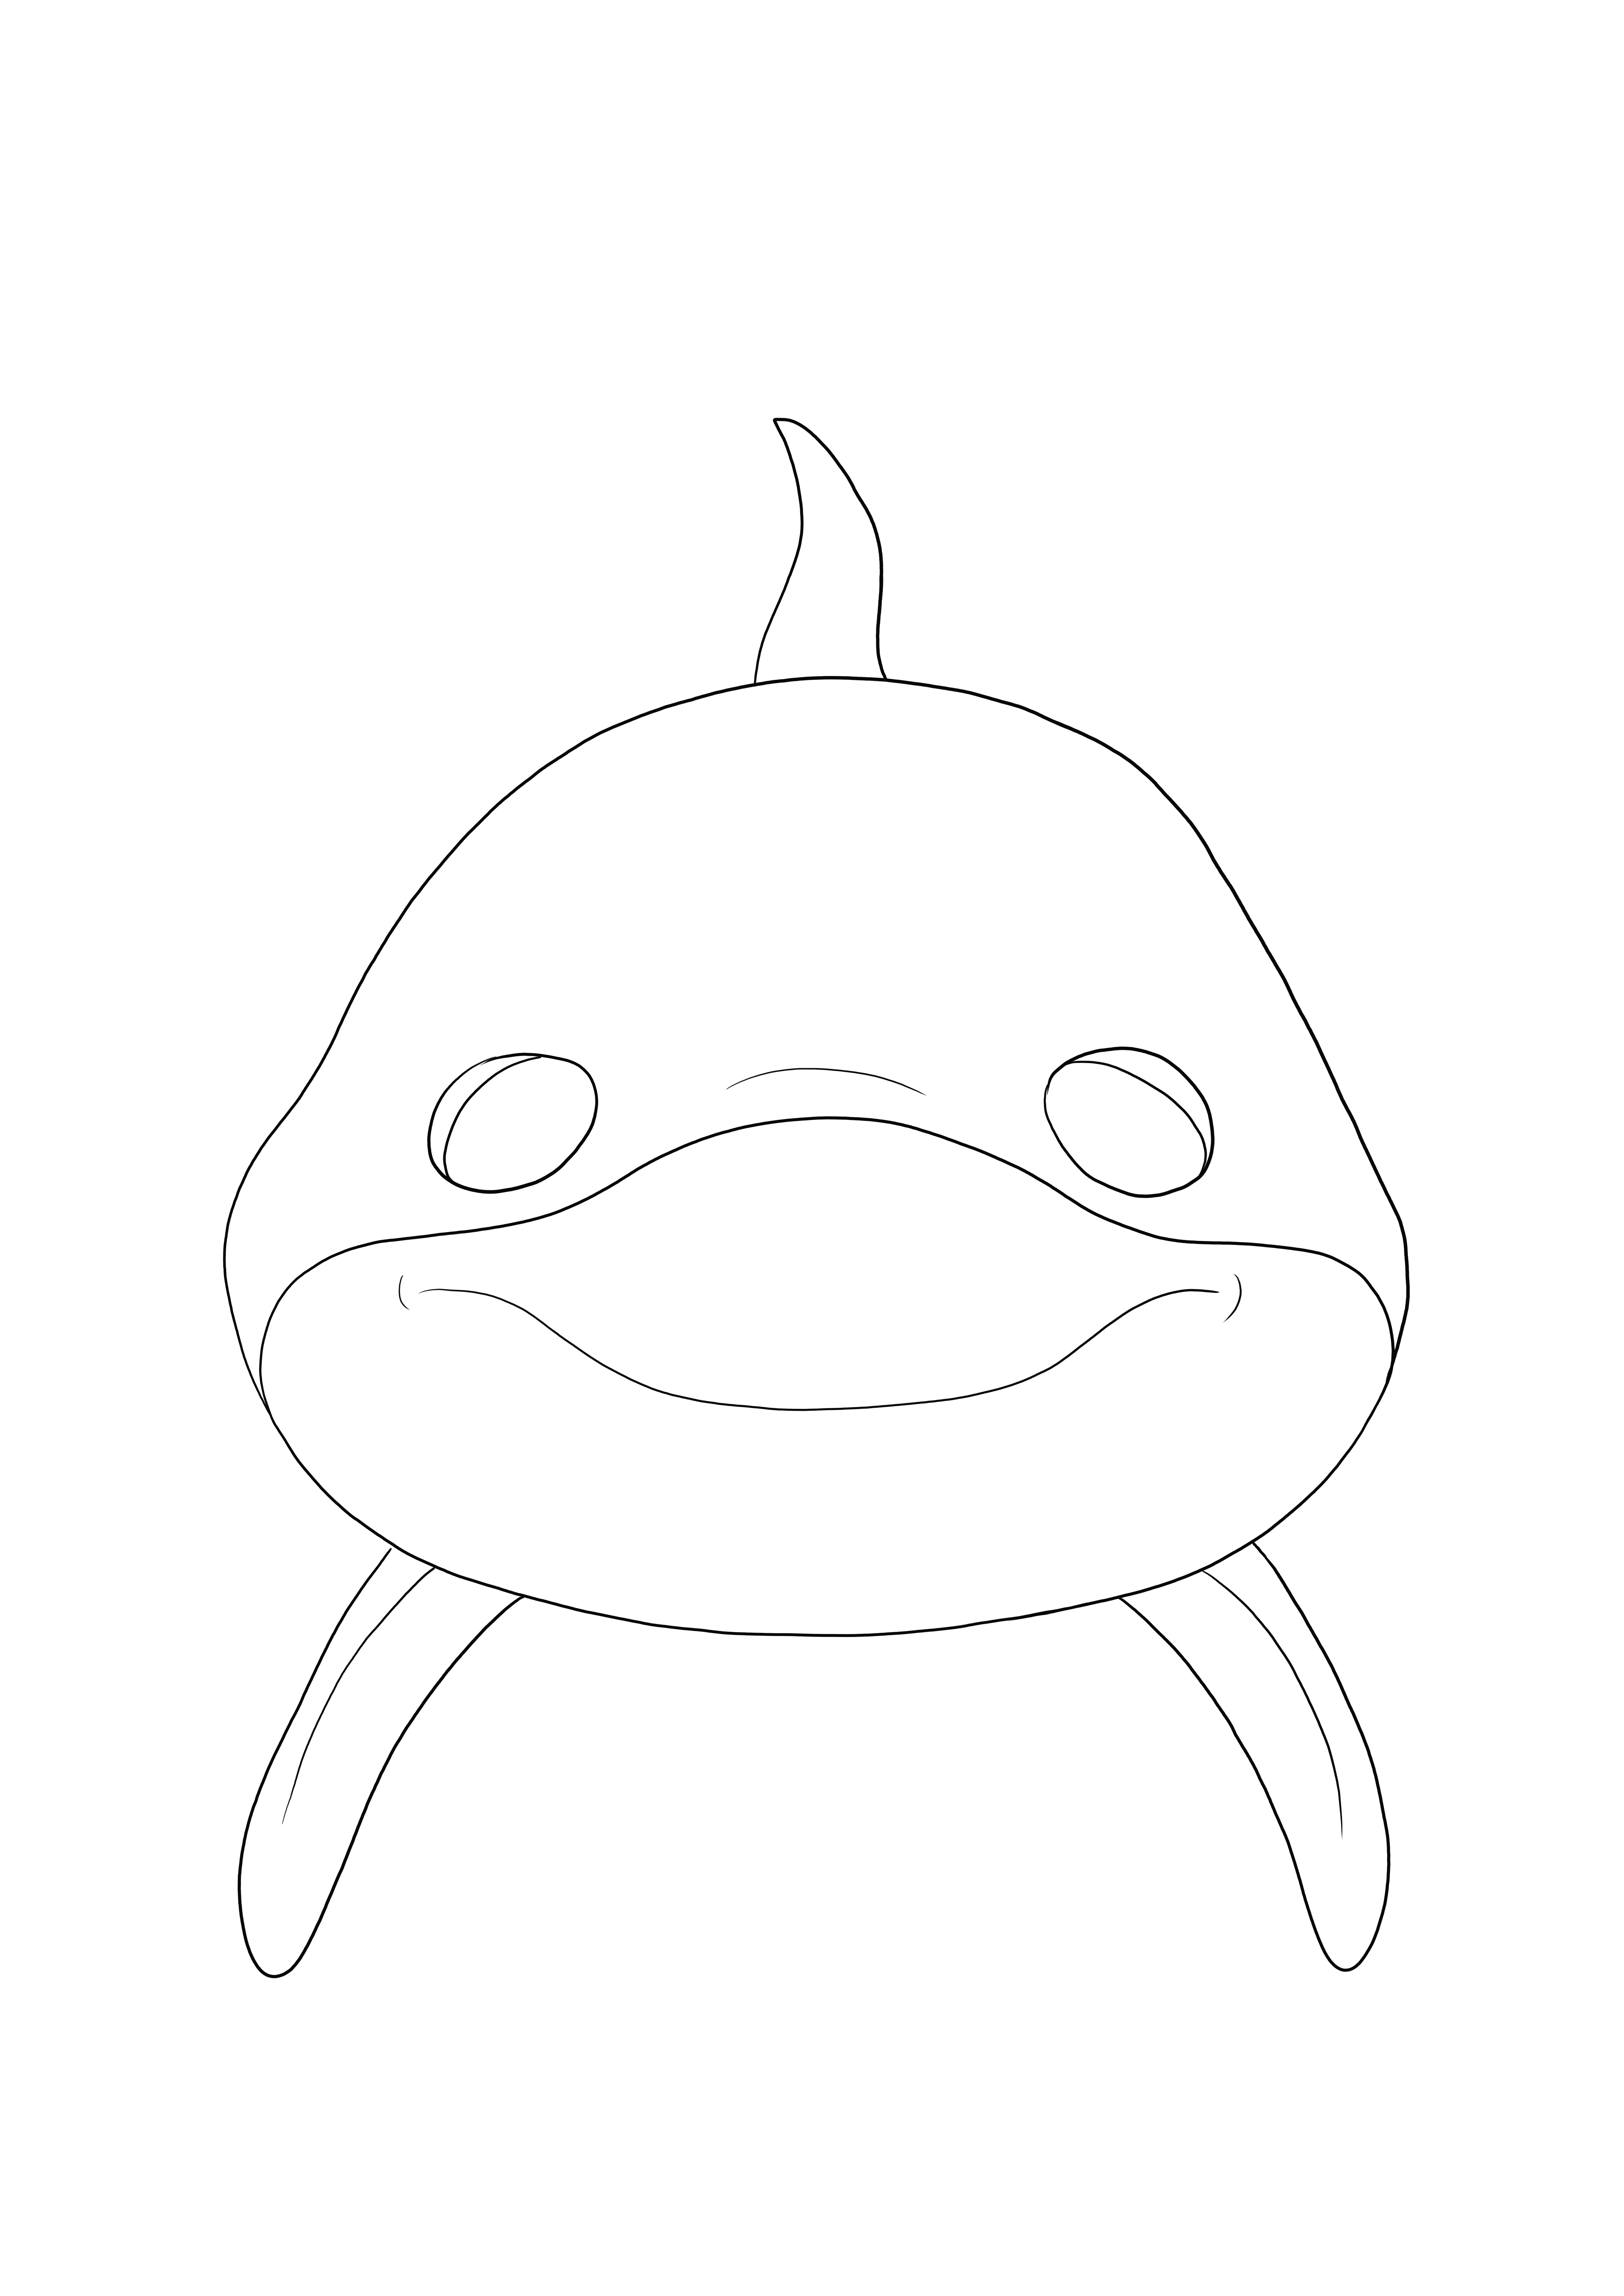 Dolphin mask free printable to download and color for kids